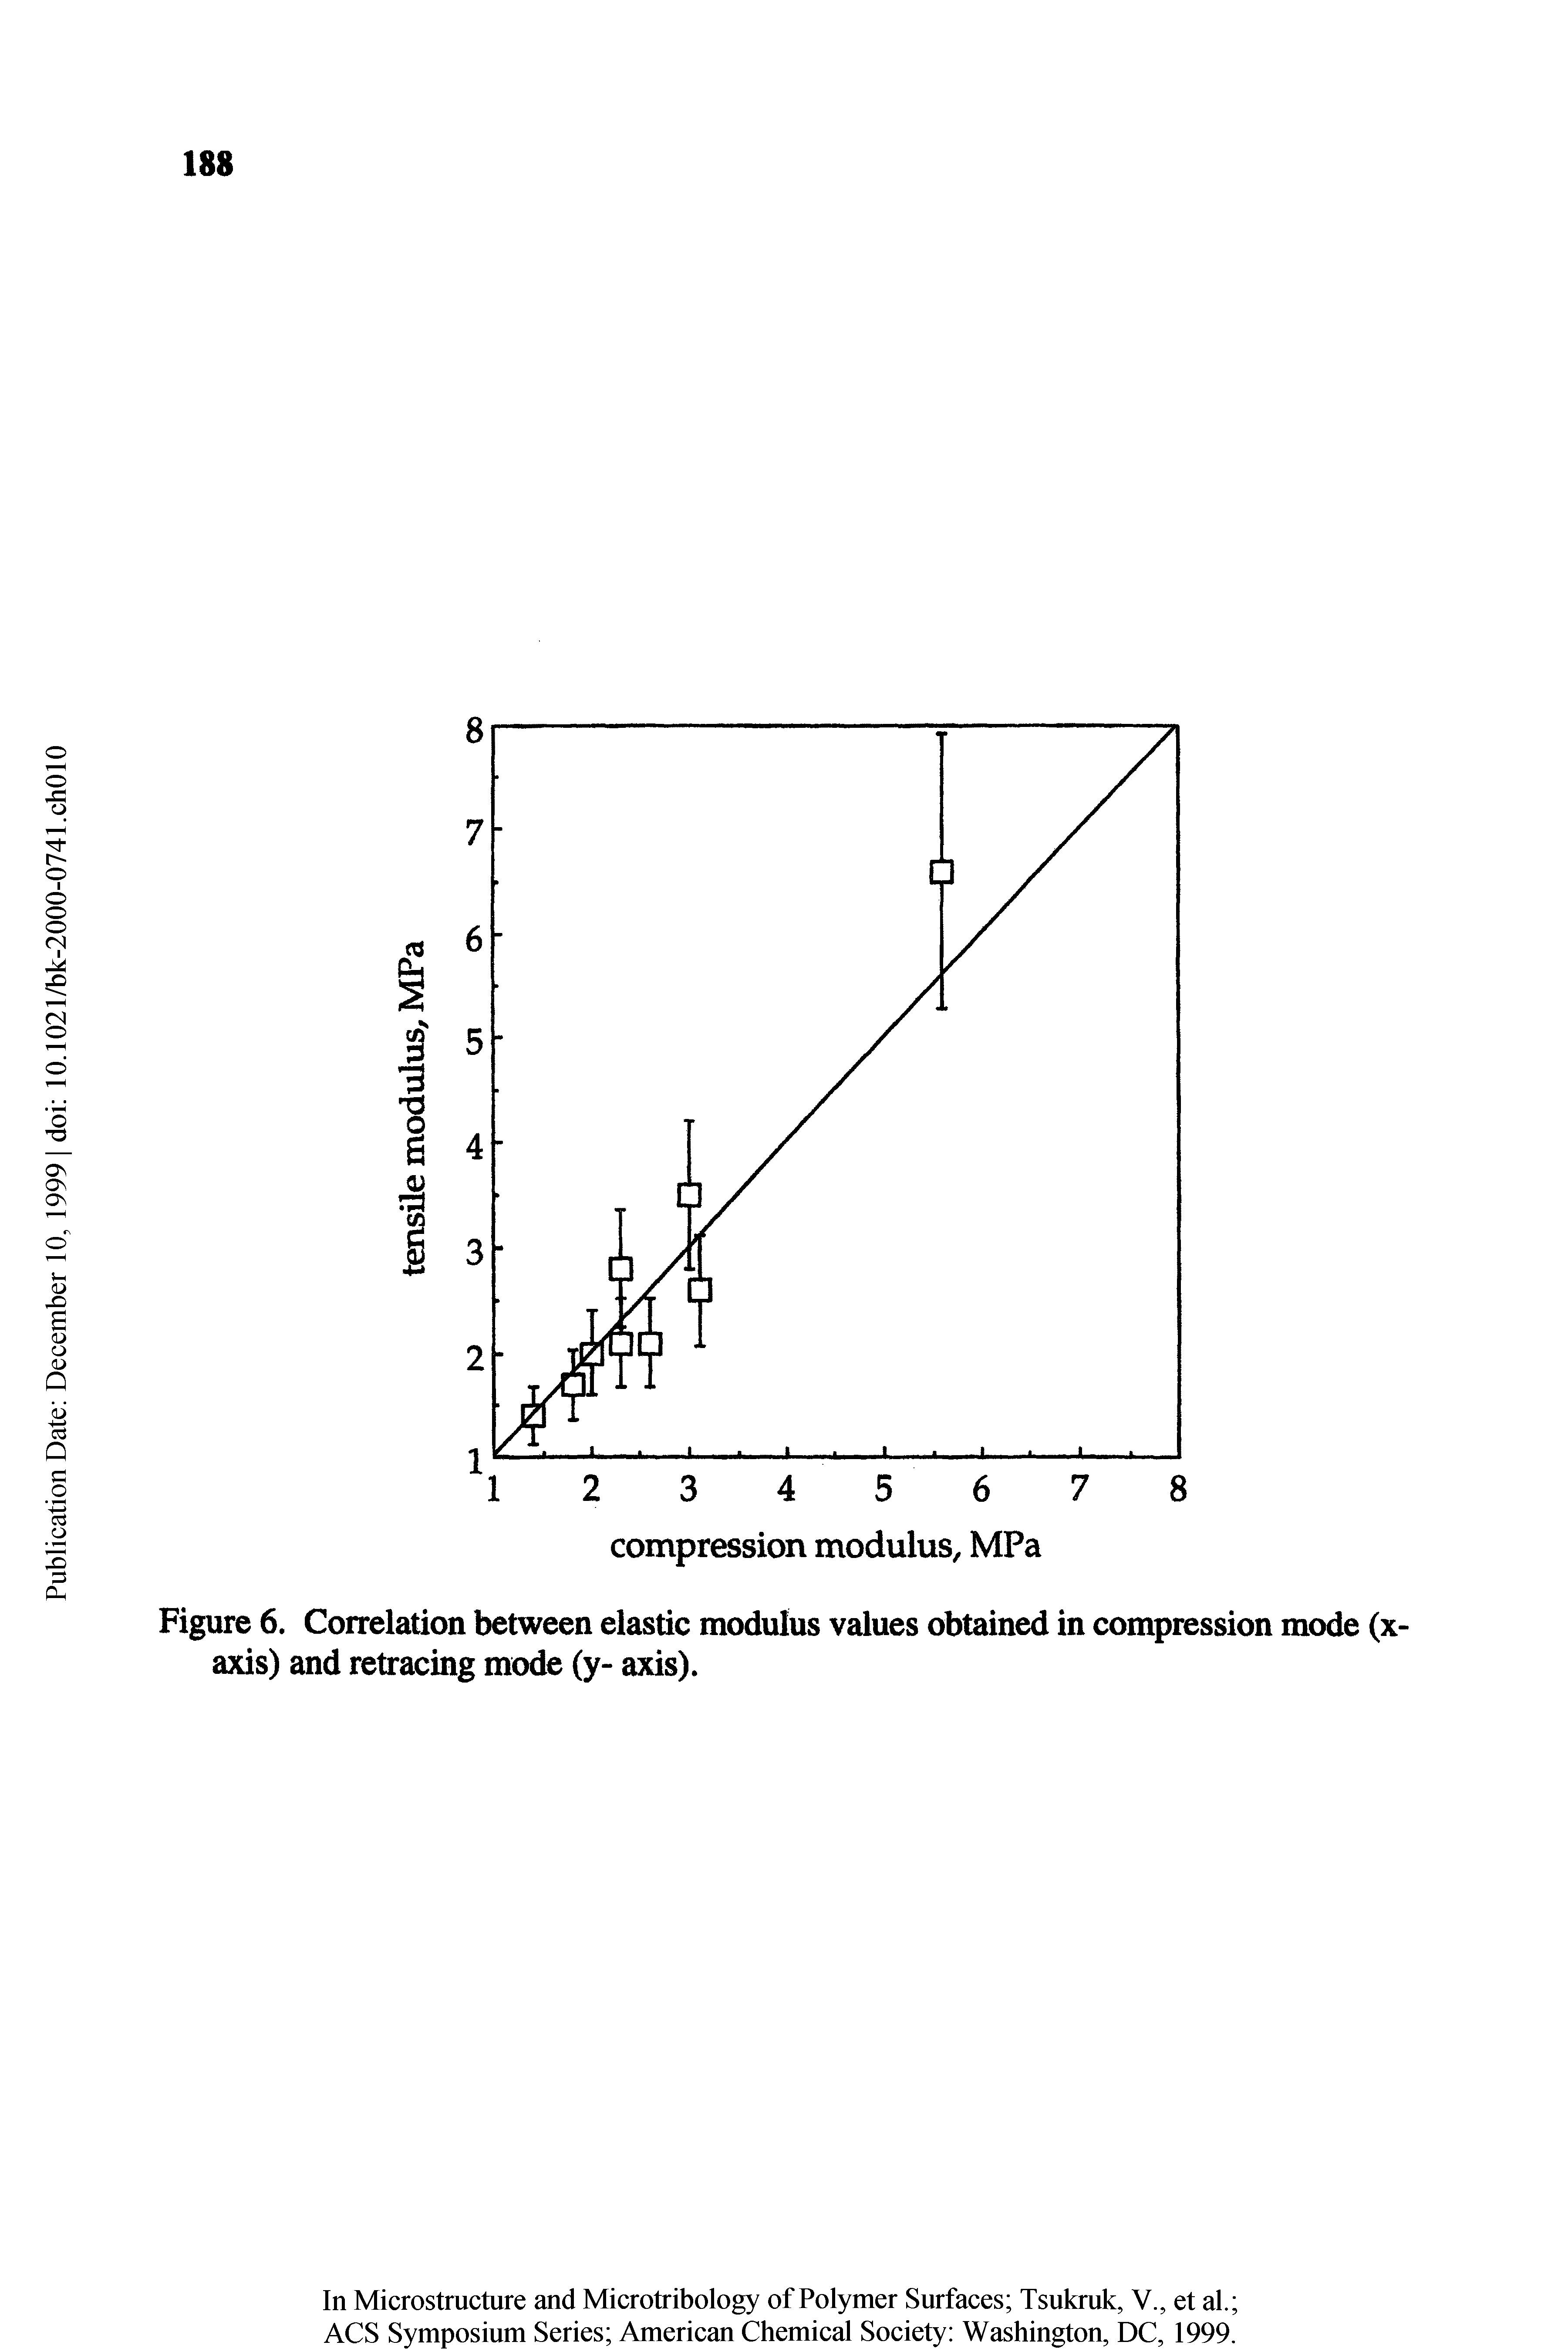 Figure 6. Correlation between elastic modulus values obtained in compression mode (x-axis) and retracing mode (y- axis).